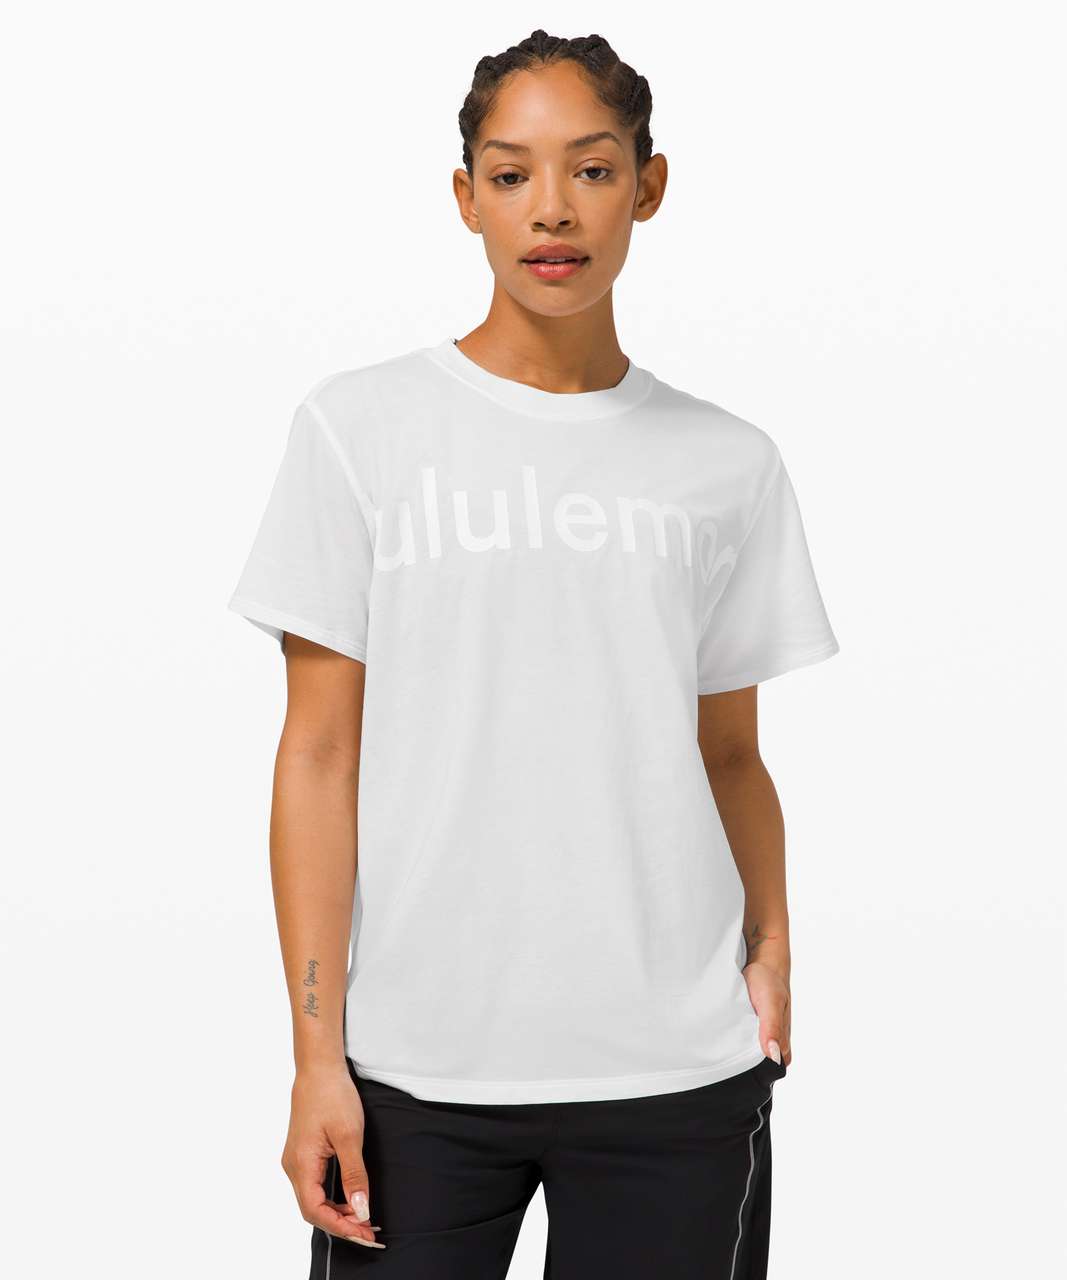 Lululemon All Yours Tee *Graphic - White